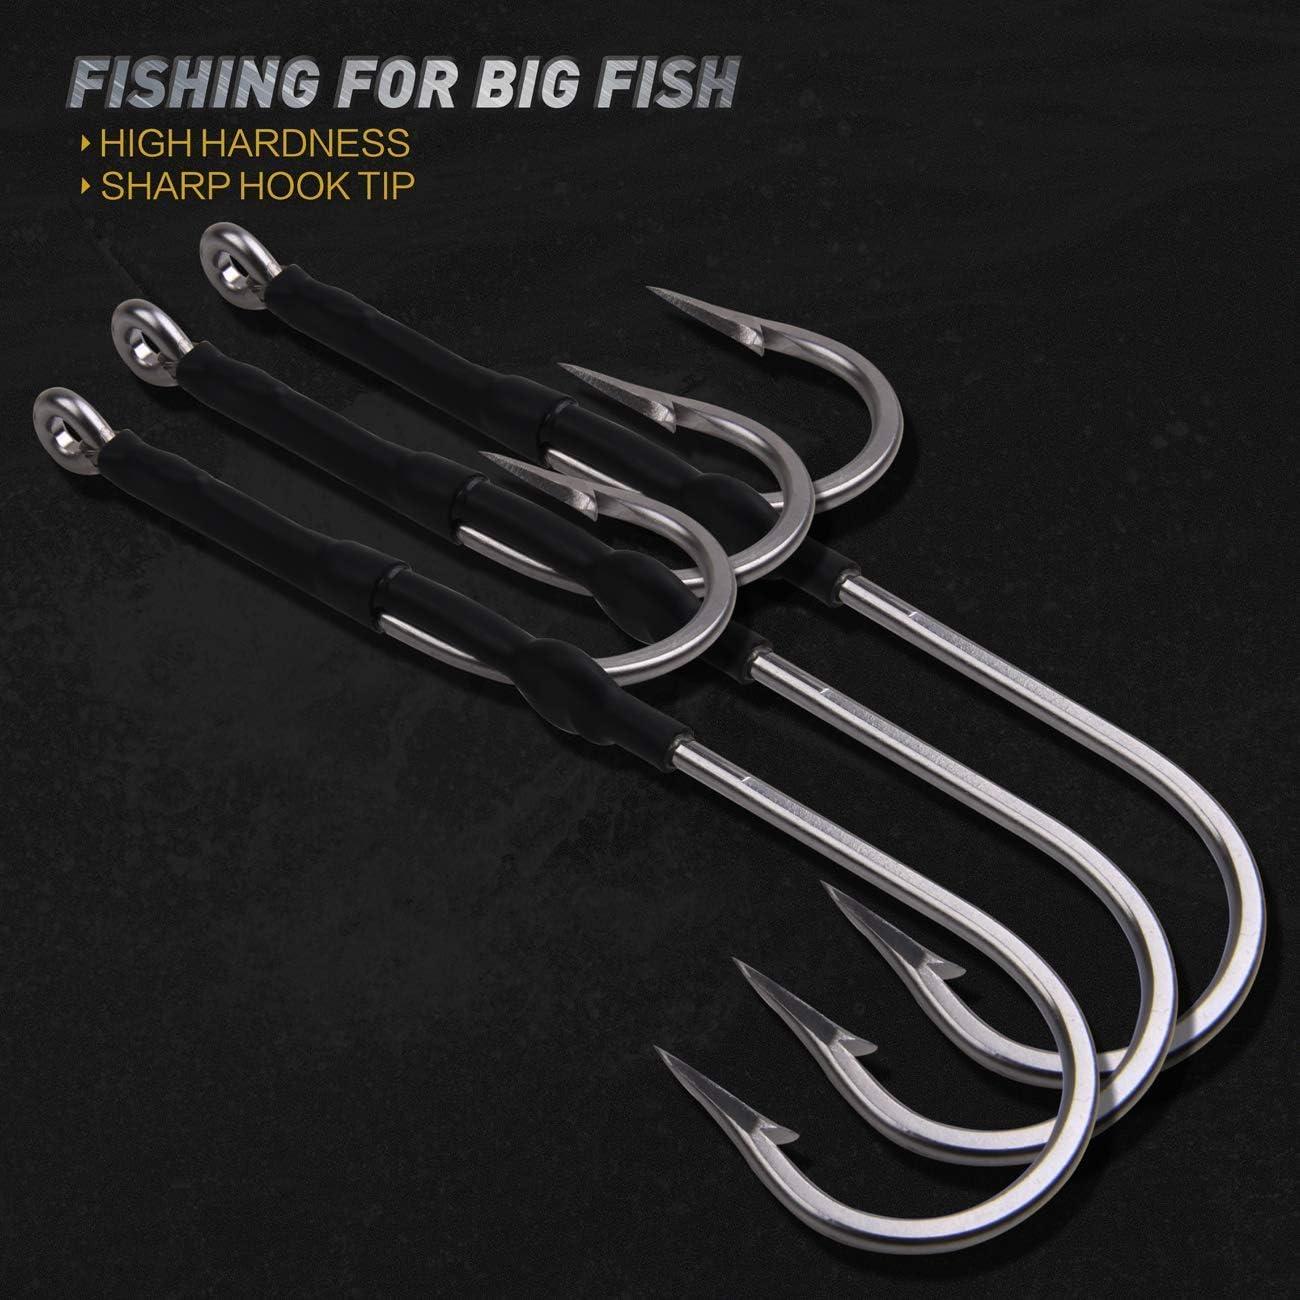 7731 Stainless Steel Fishing Hooks Saltwater Large Giant Shark and